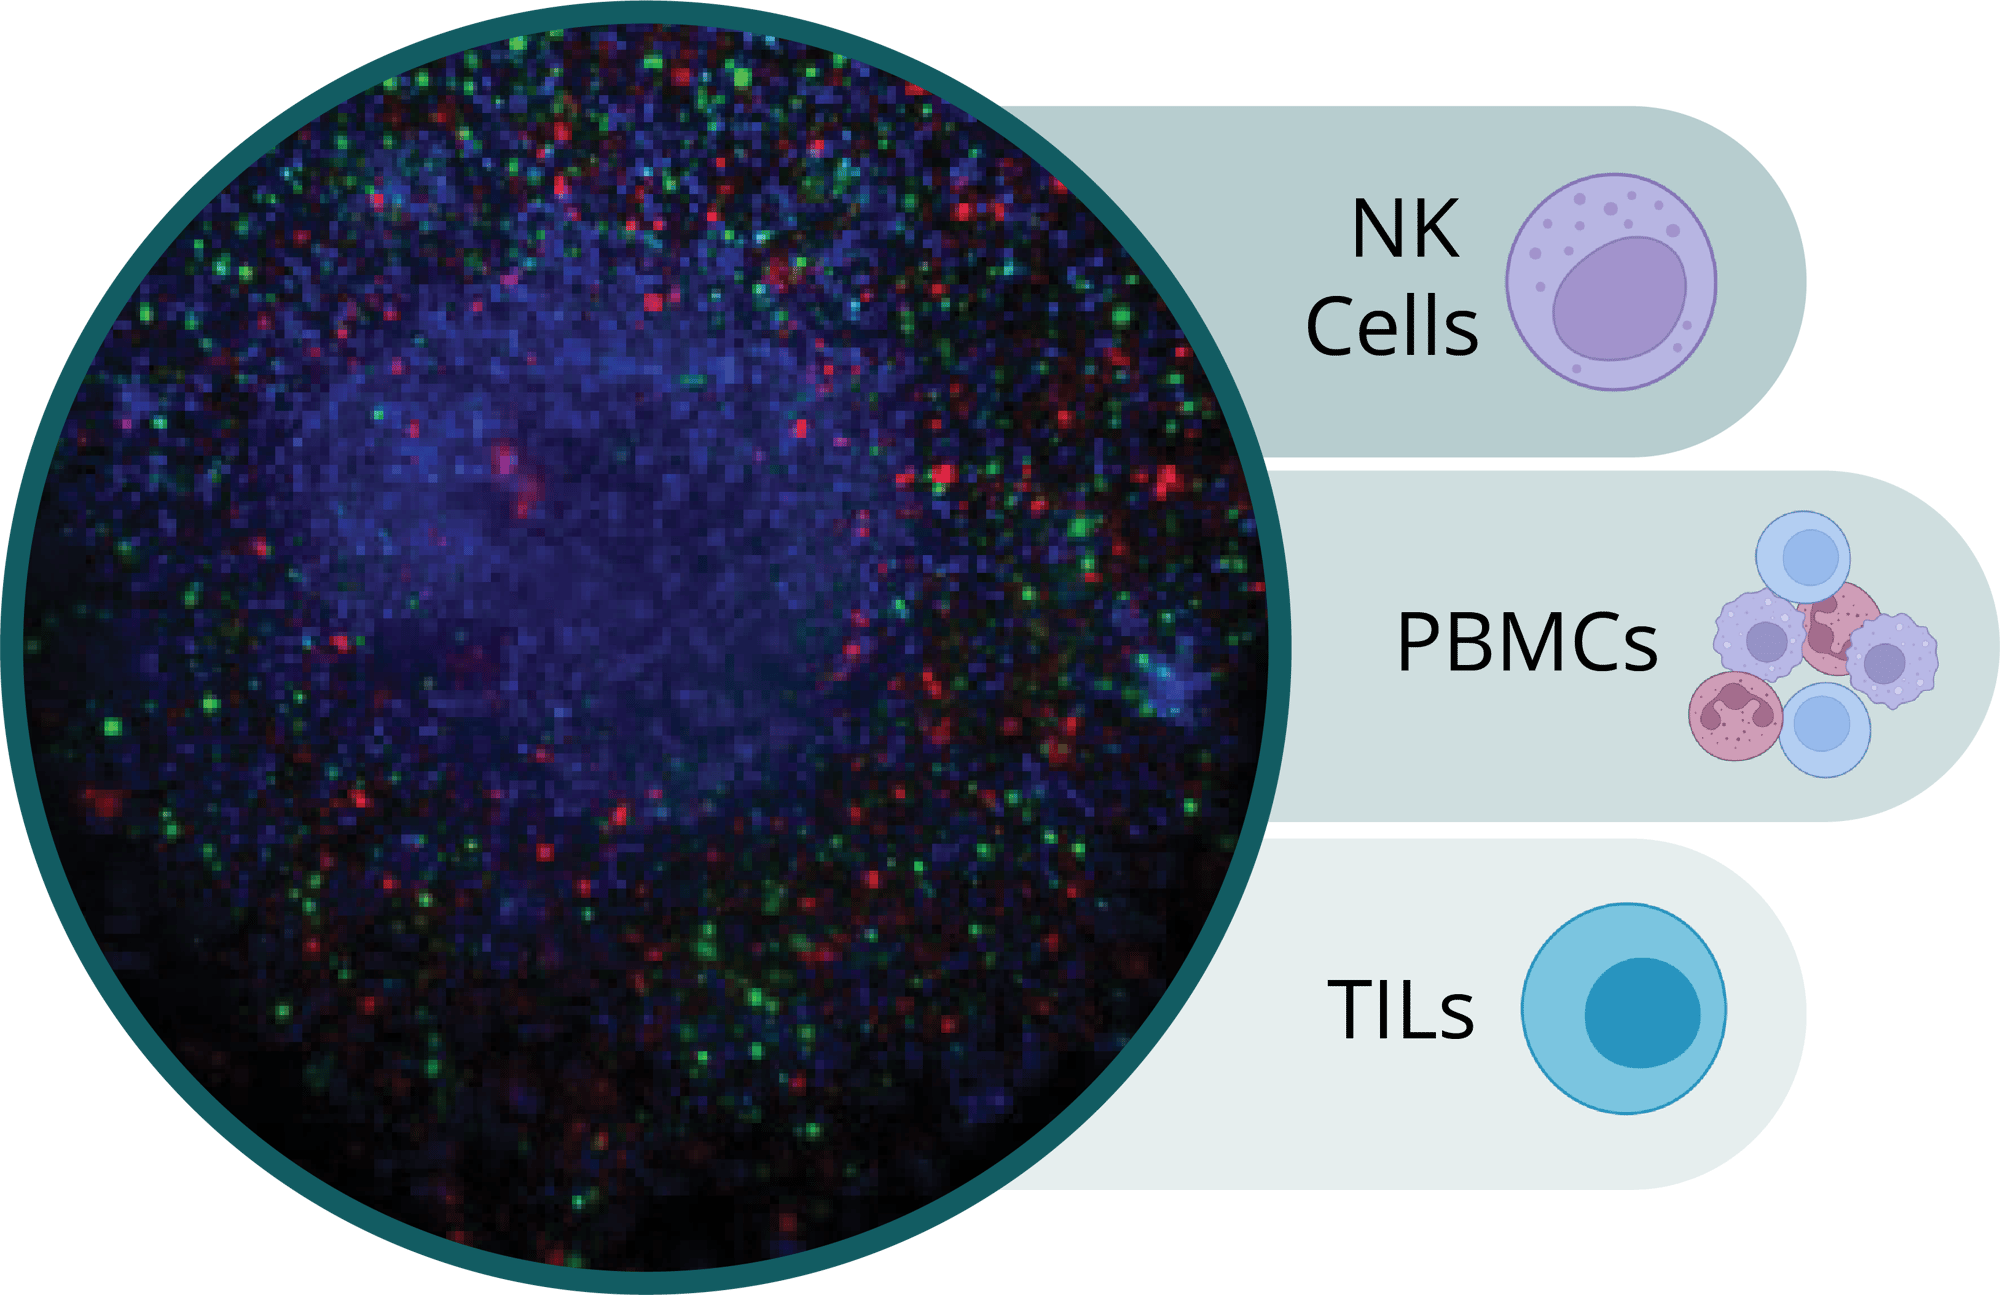 Co-culture assays can be completed with Tumors alongside NK Cells, PBMCs, or TILs.